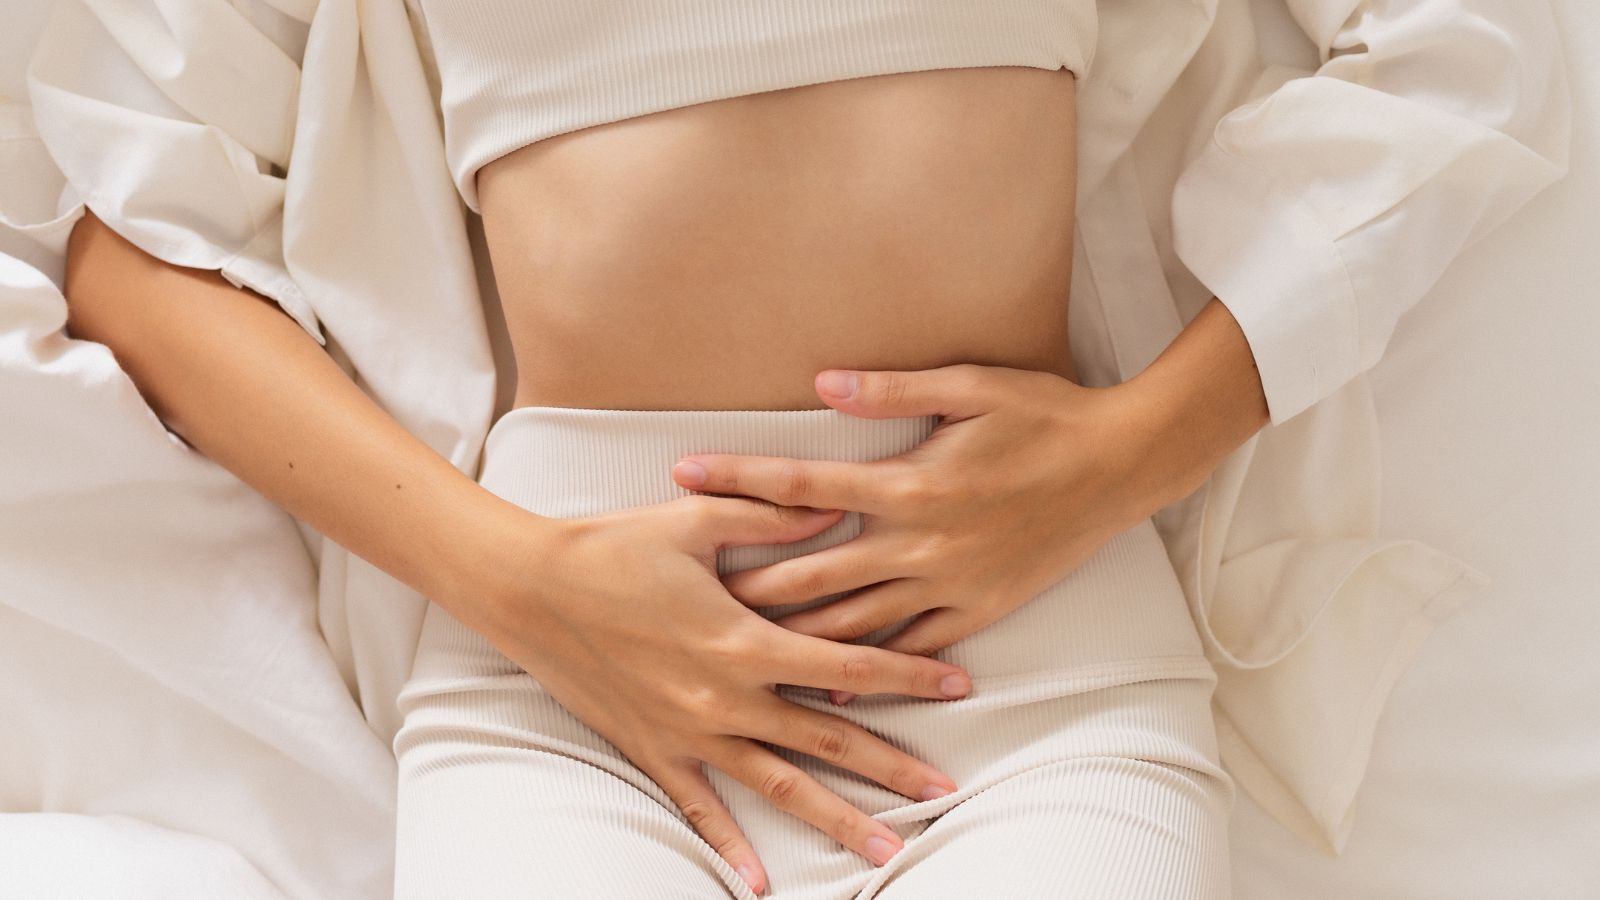 Uses and benefits of rose essential oil. Helps womens problems. Image of young woman wearing a light coloured pair of trousers, clutching her stomach region